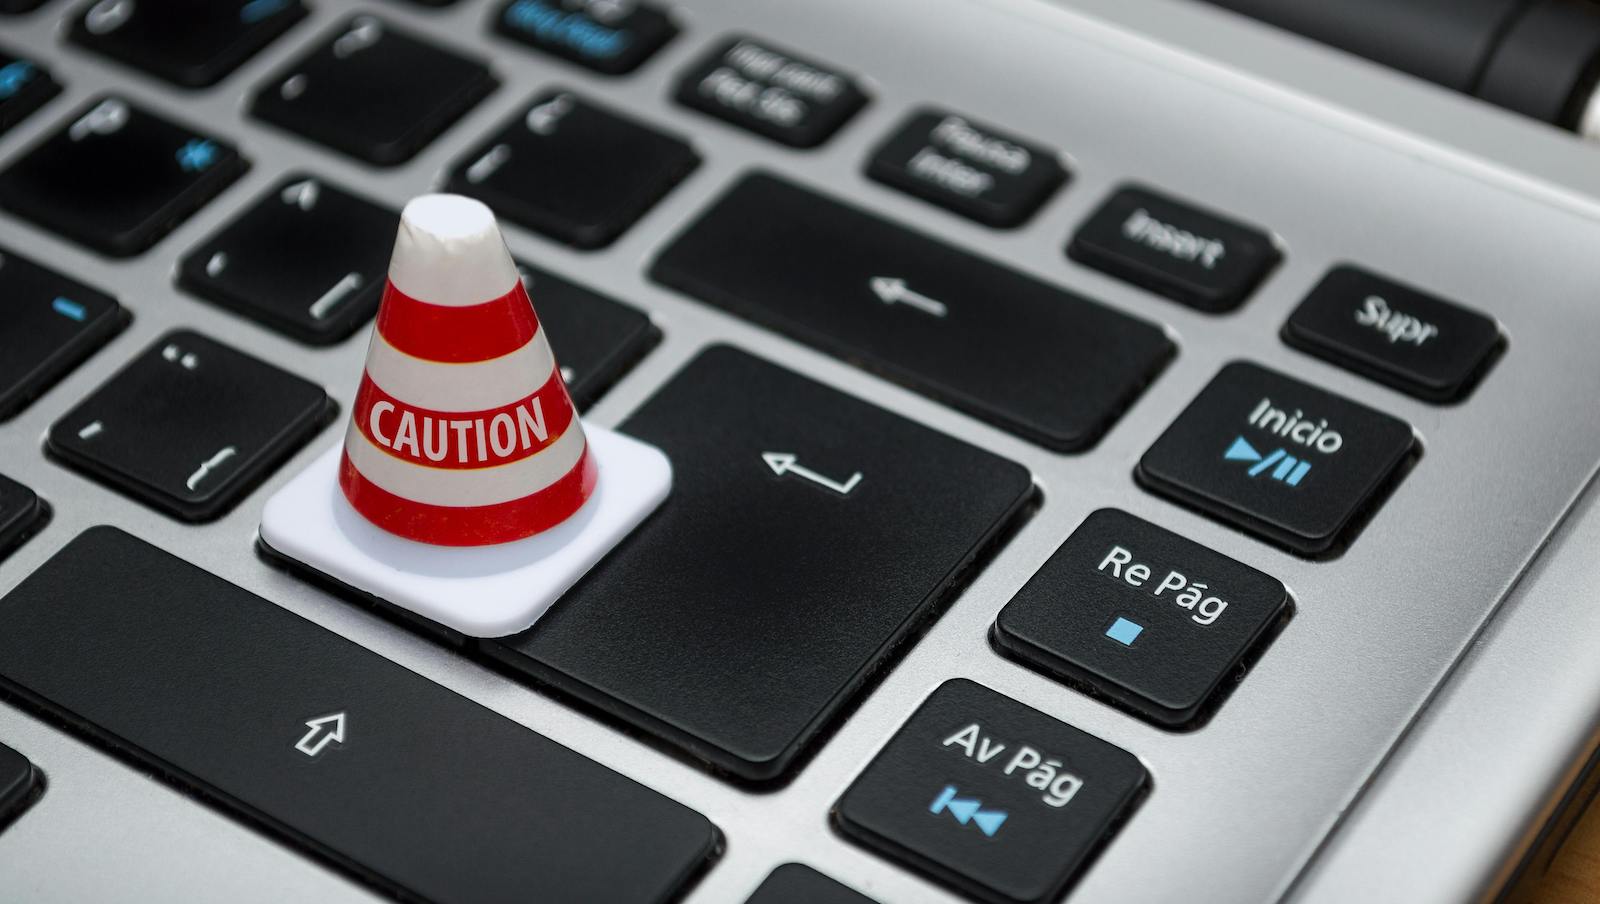 Caution cone on a keyboard